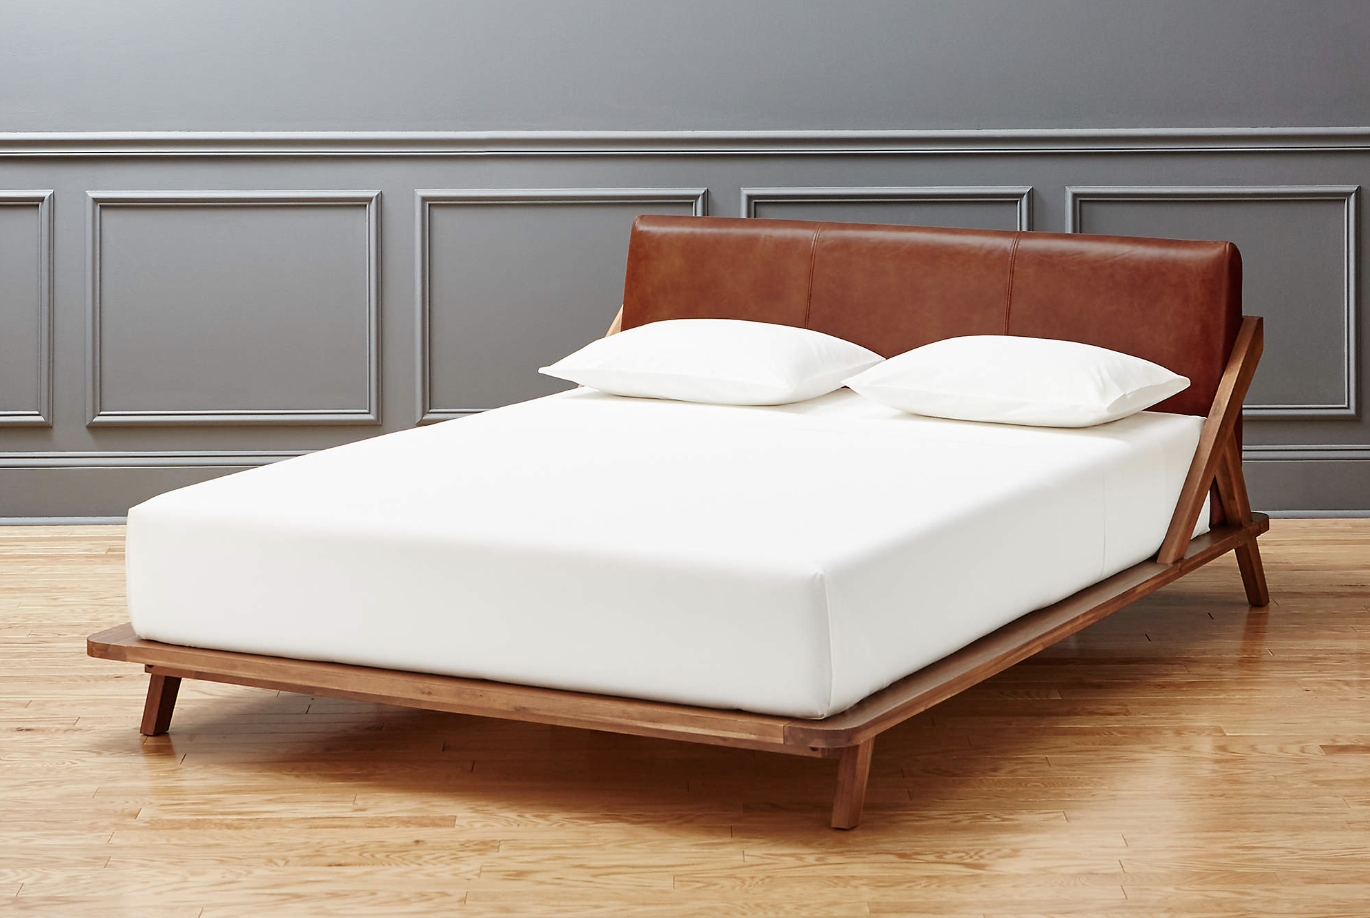 A wood and leather bed is shown